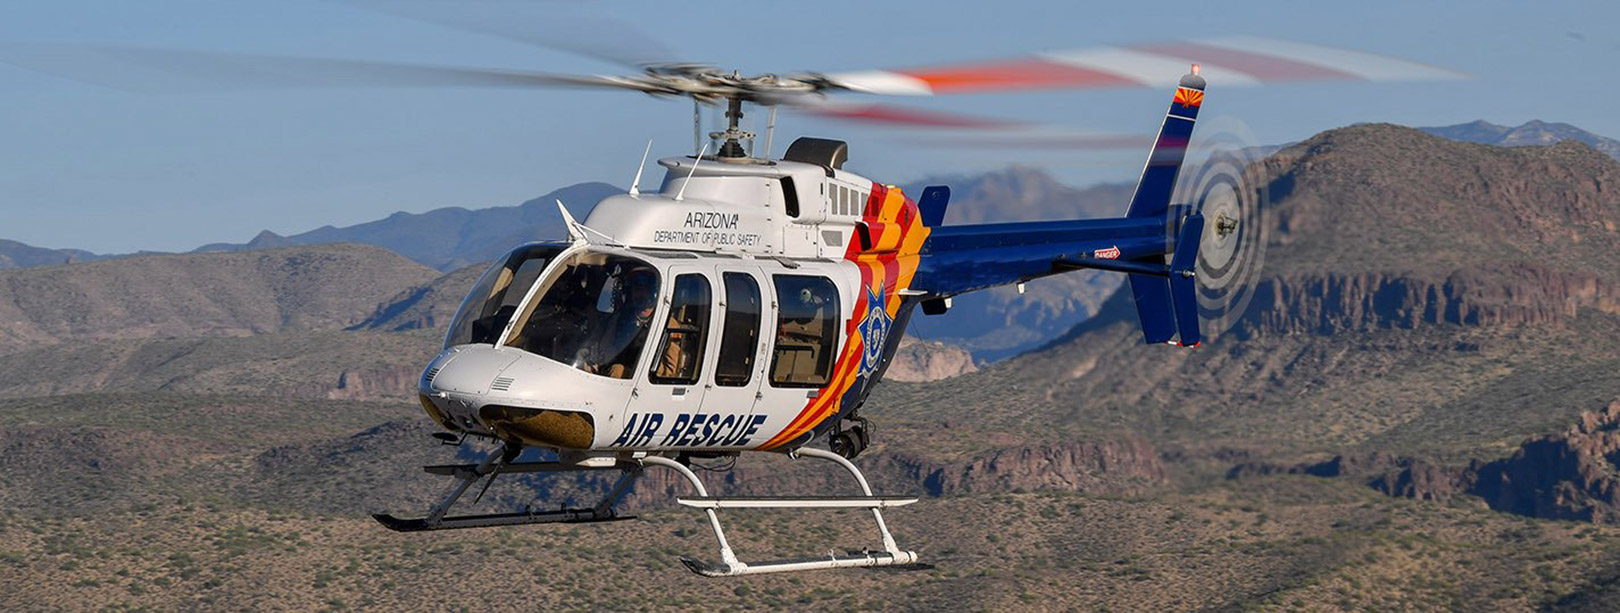 airborne innovations search and rescue helicopters